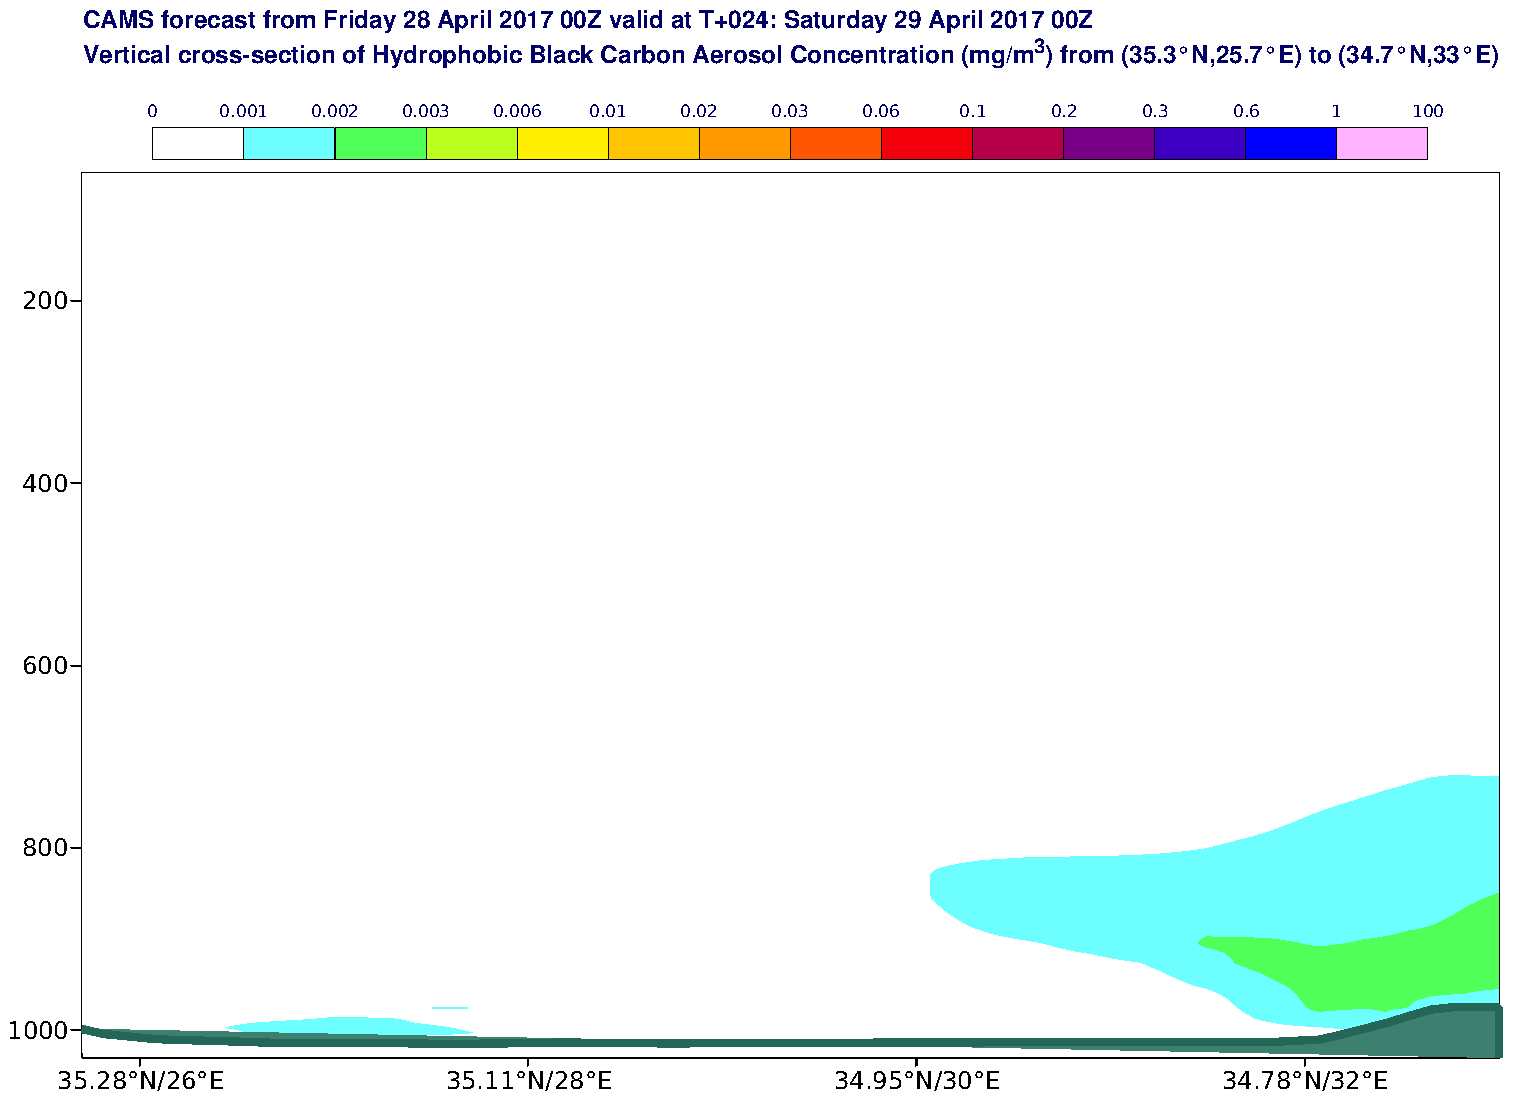 Vertical cross-section of Hydrophobic Black Carbon Aerosol Concentration (mg/m3) valid at T24 - 2017-04-29 00:00